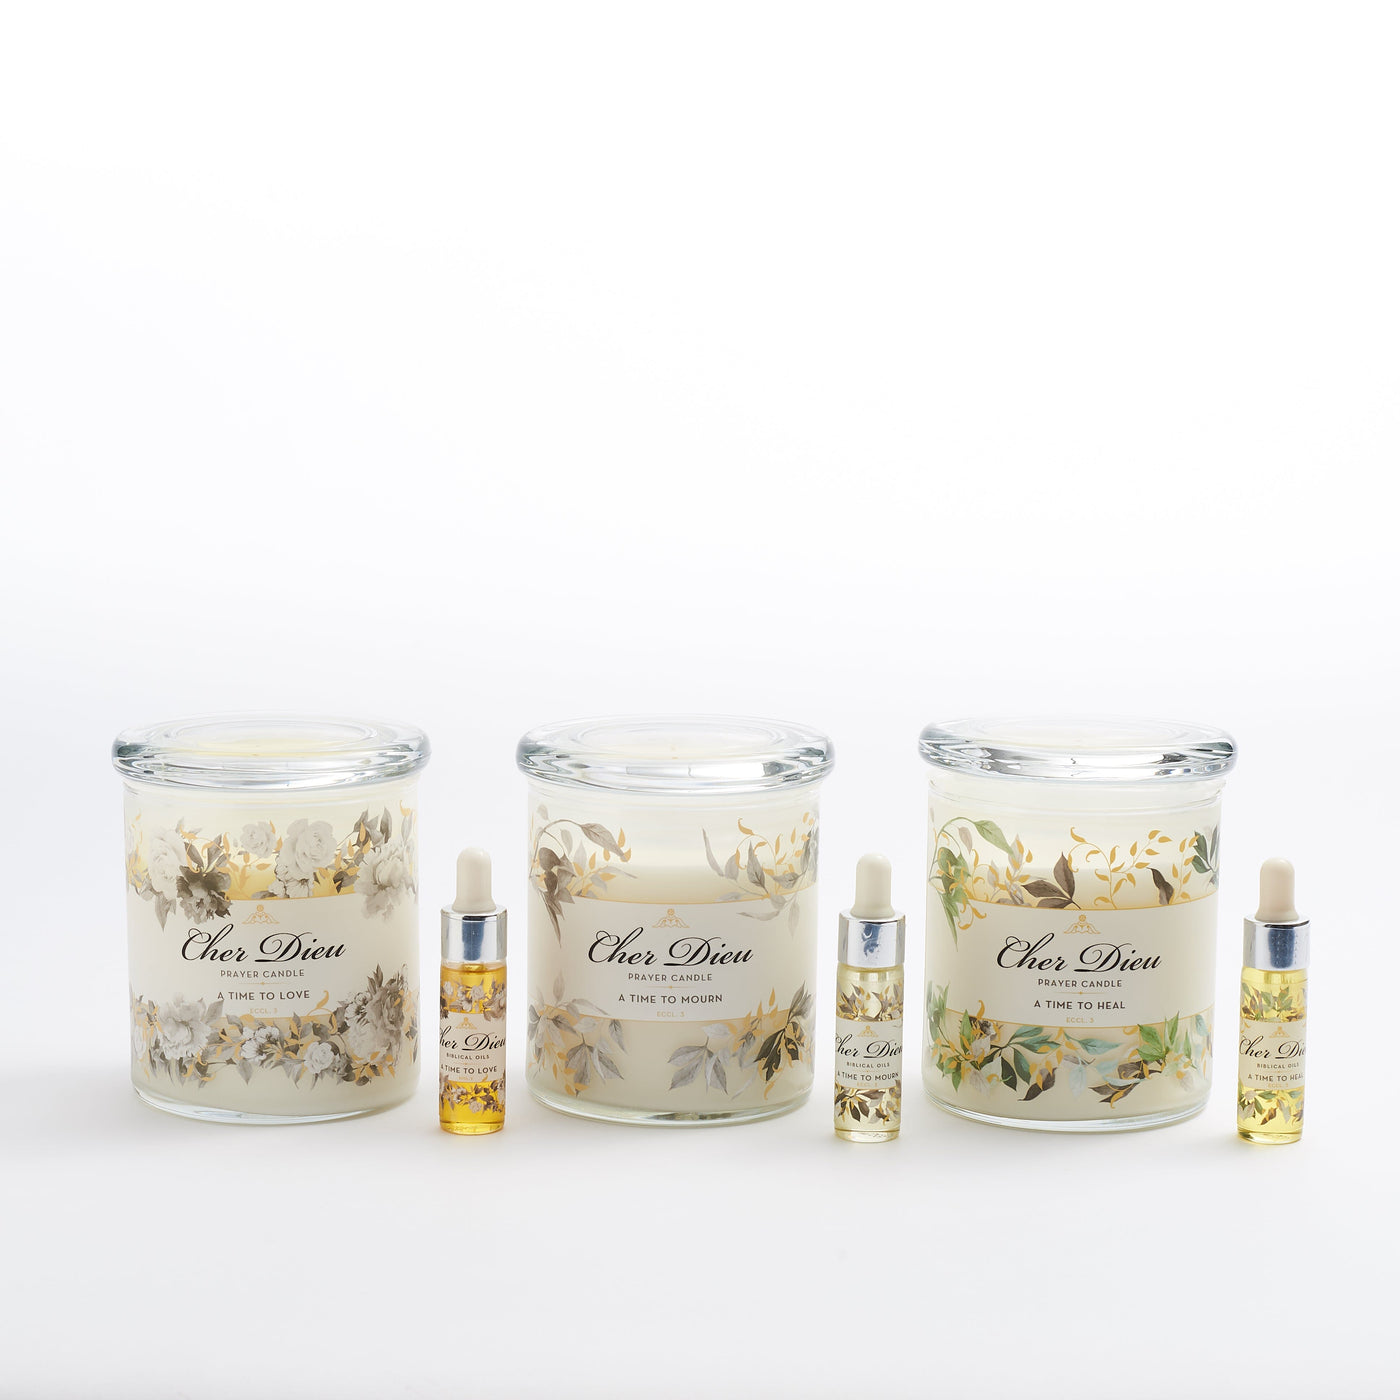 A Time to Heal Classic Candle Kit Candles Cher Dieu 